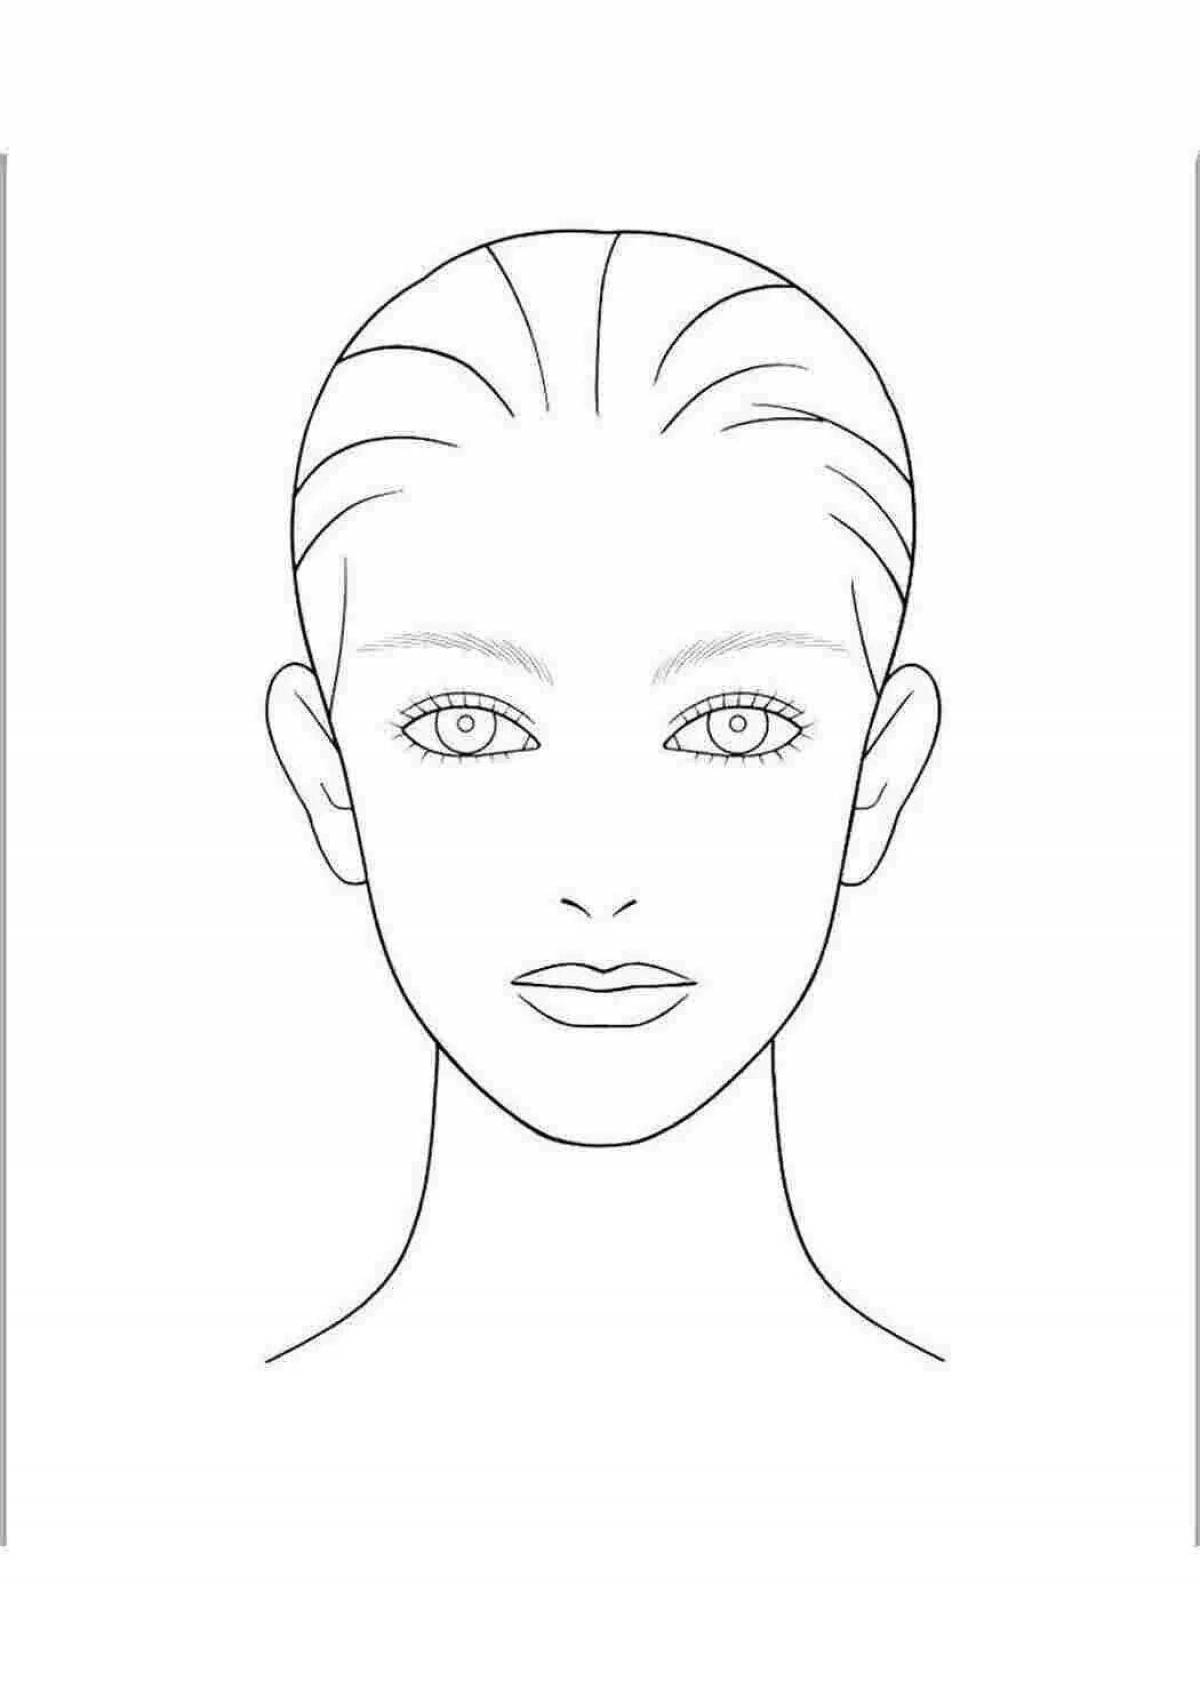 Smiling people coloring page